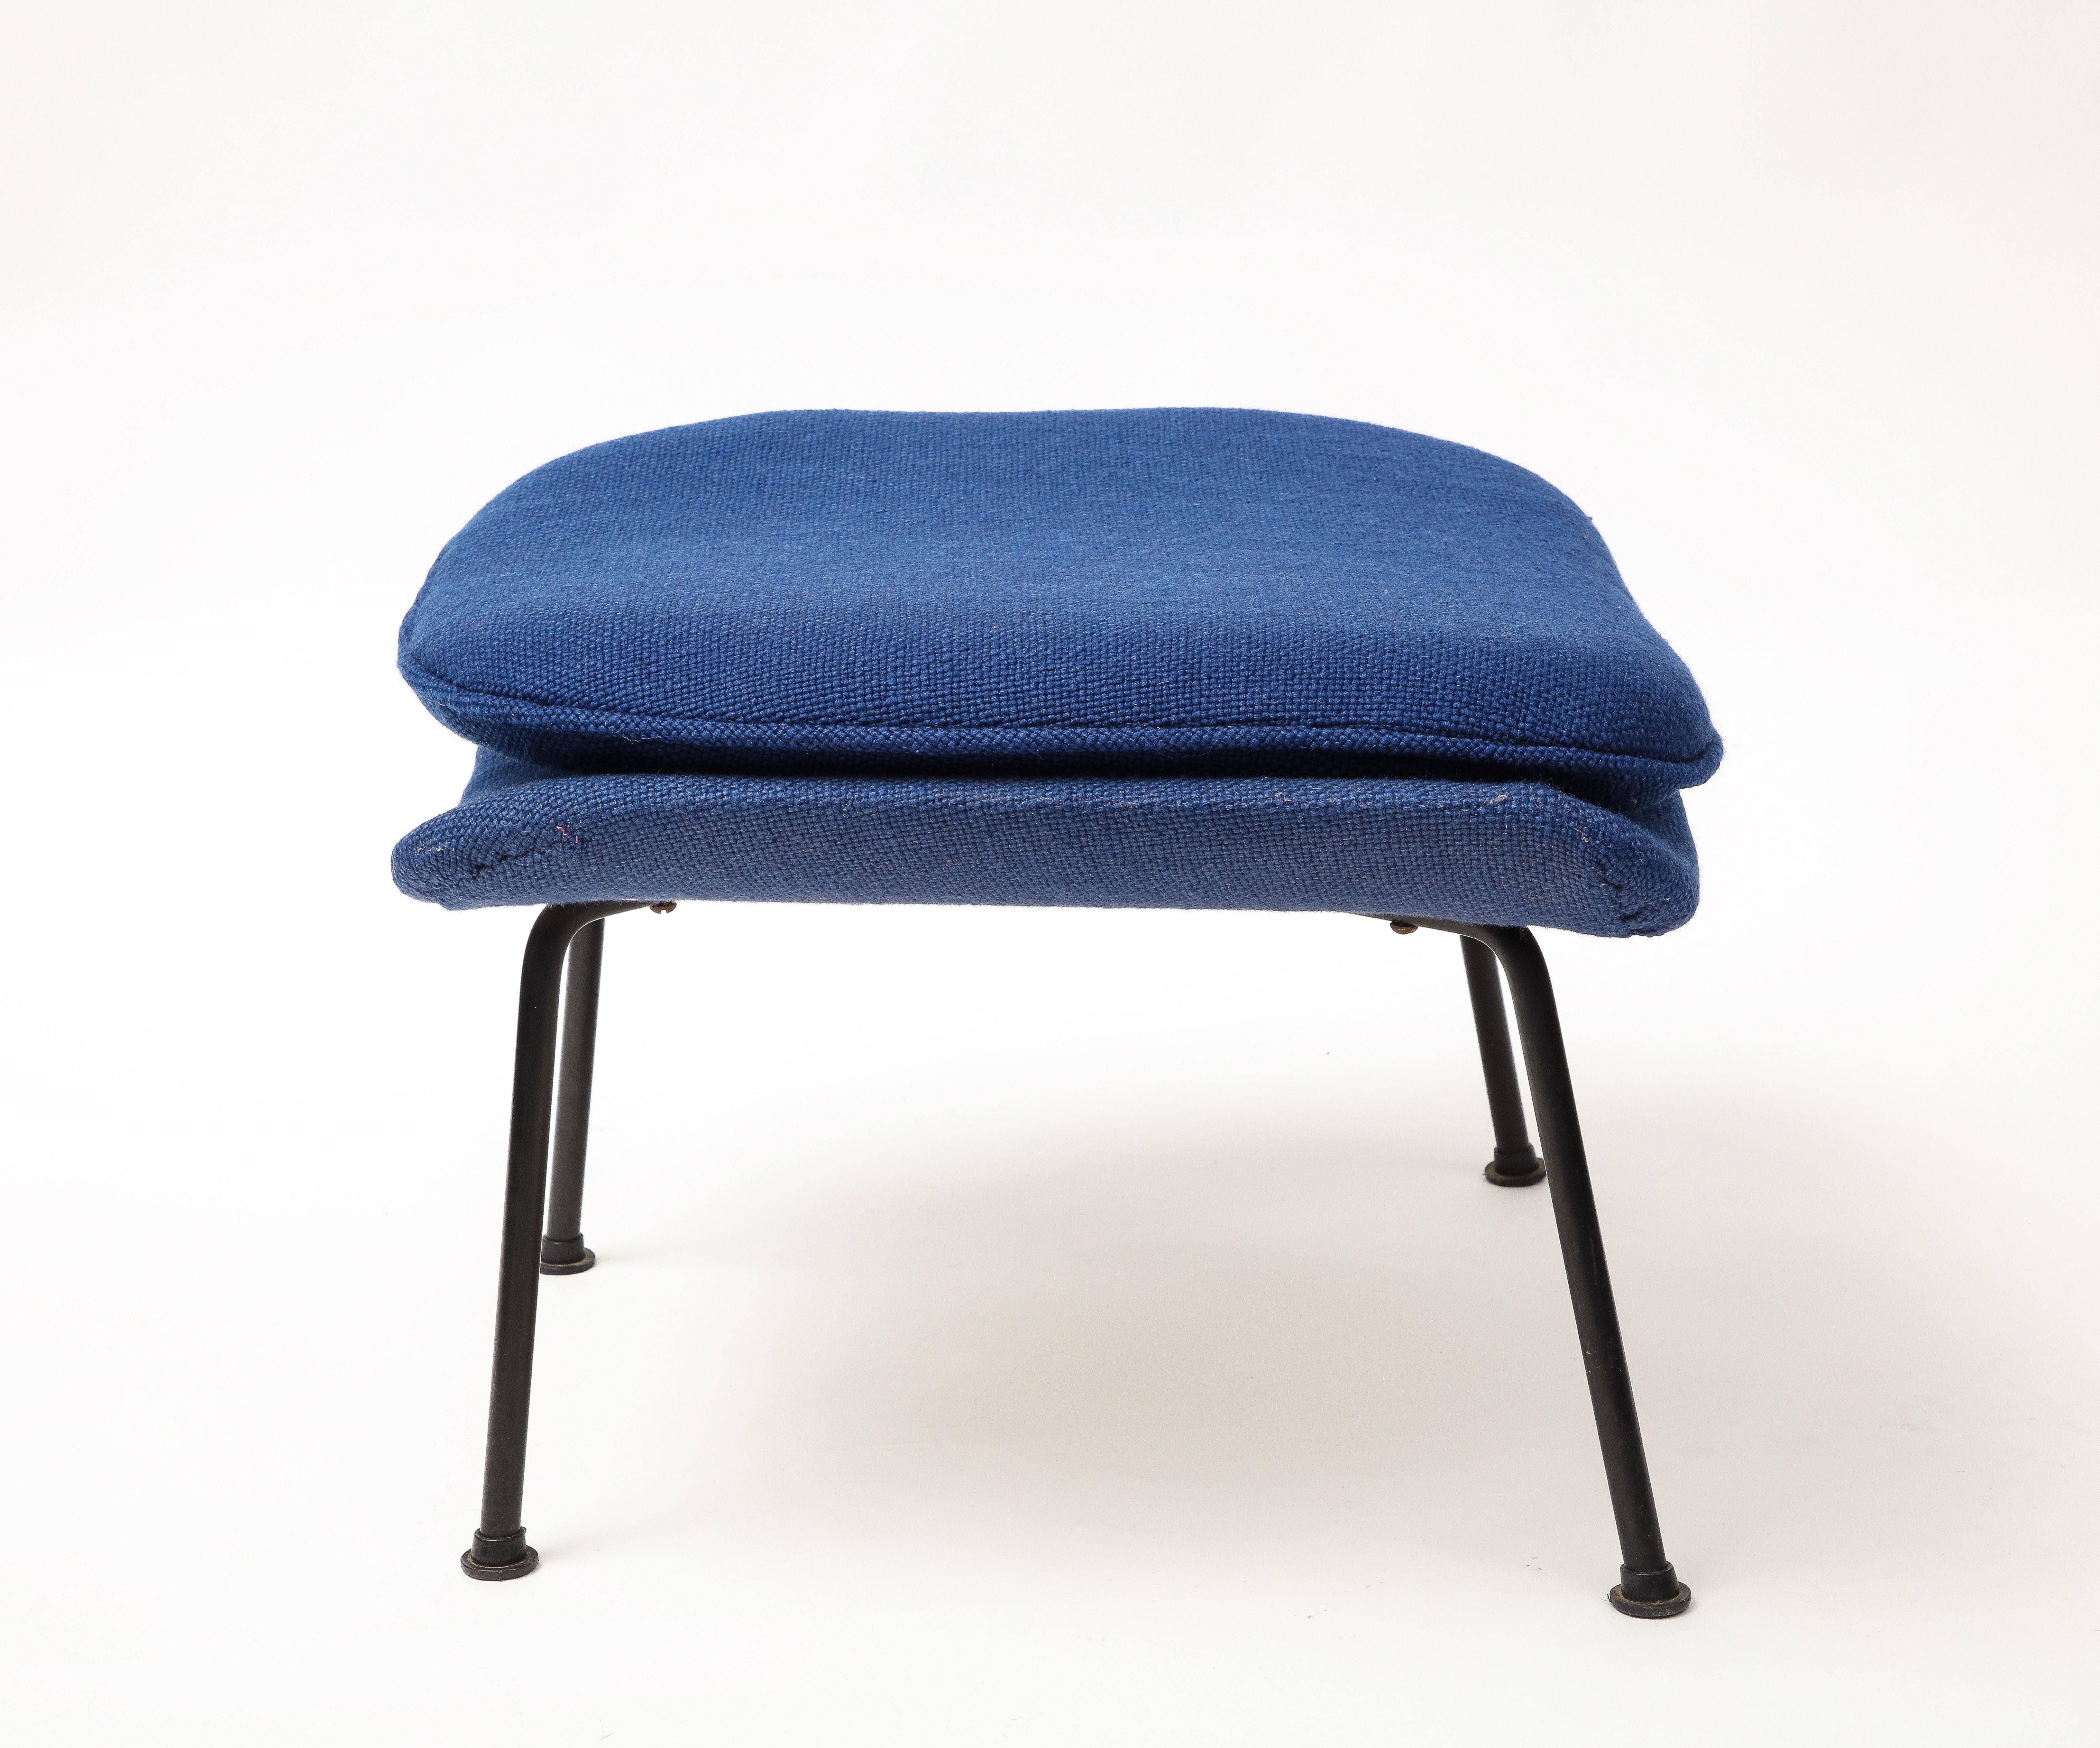 Mid-20th Century Early Eero Saarinen Knoll Womb Chair & Ottoman, Blue Upholstery, Black Frame For Sale